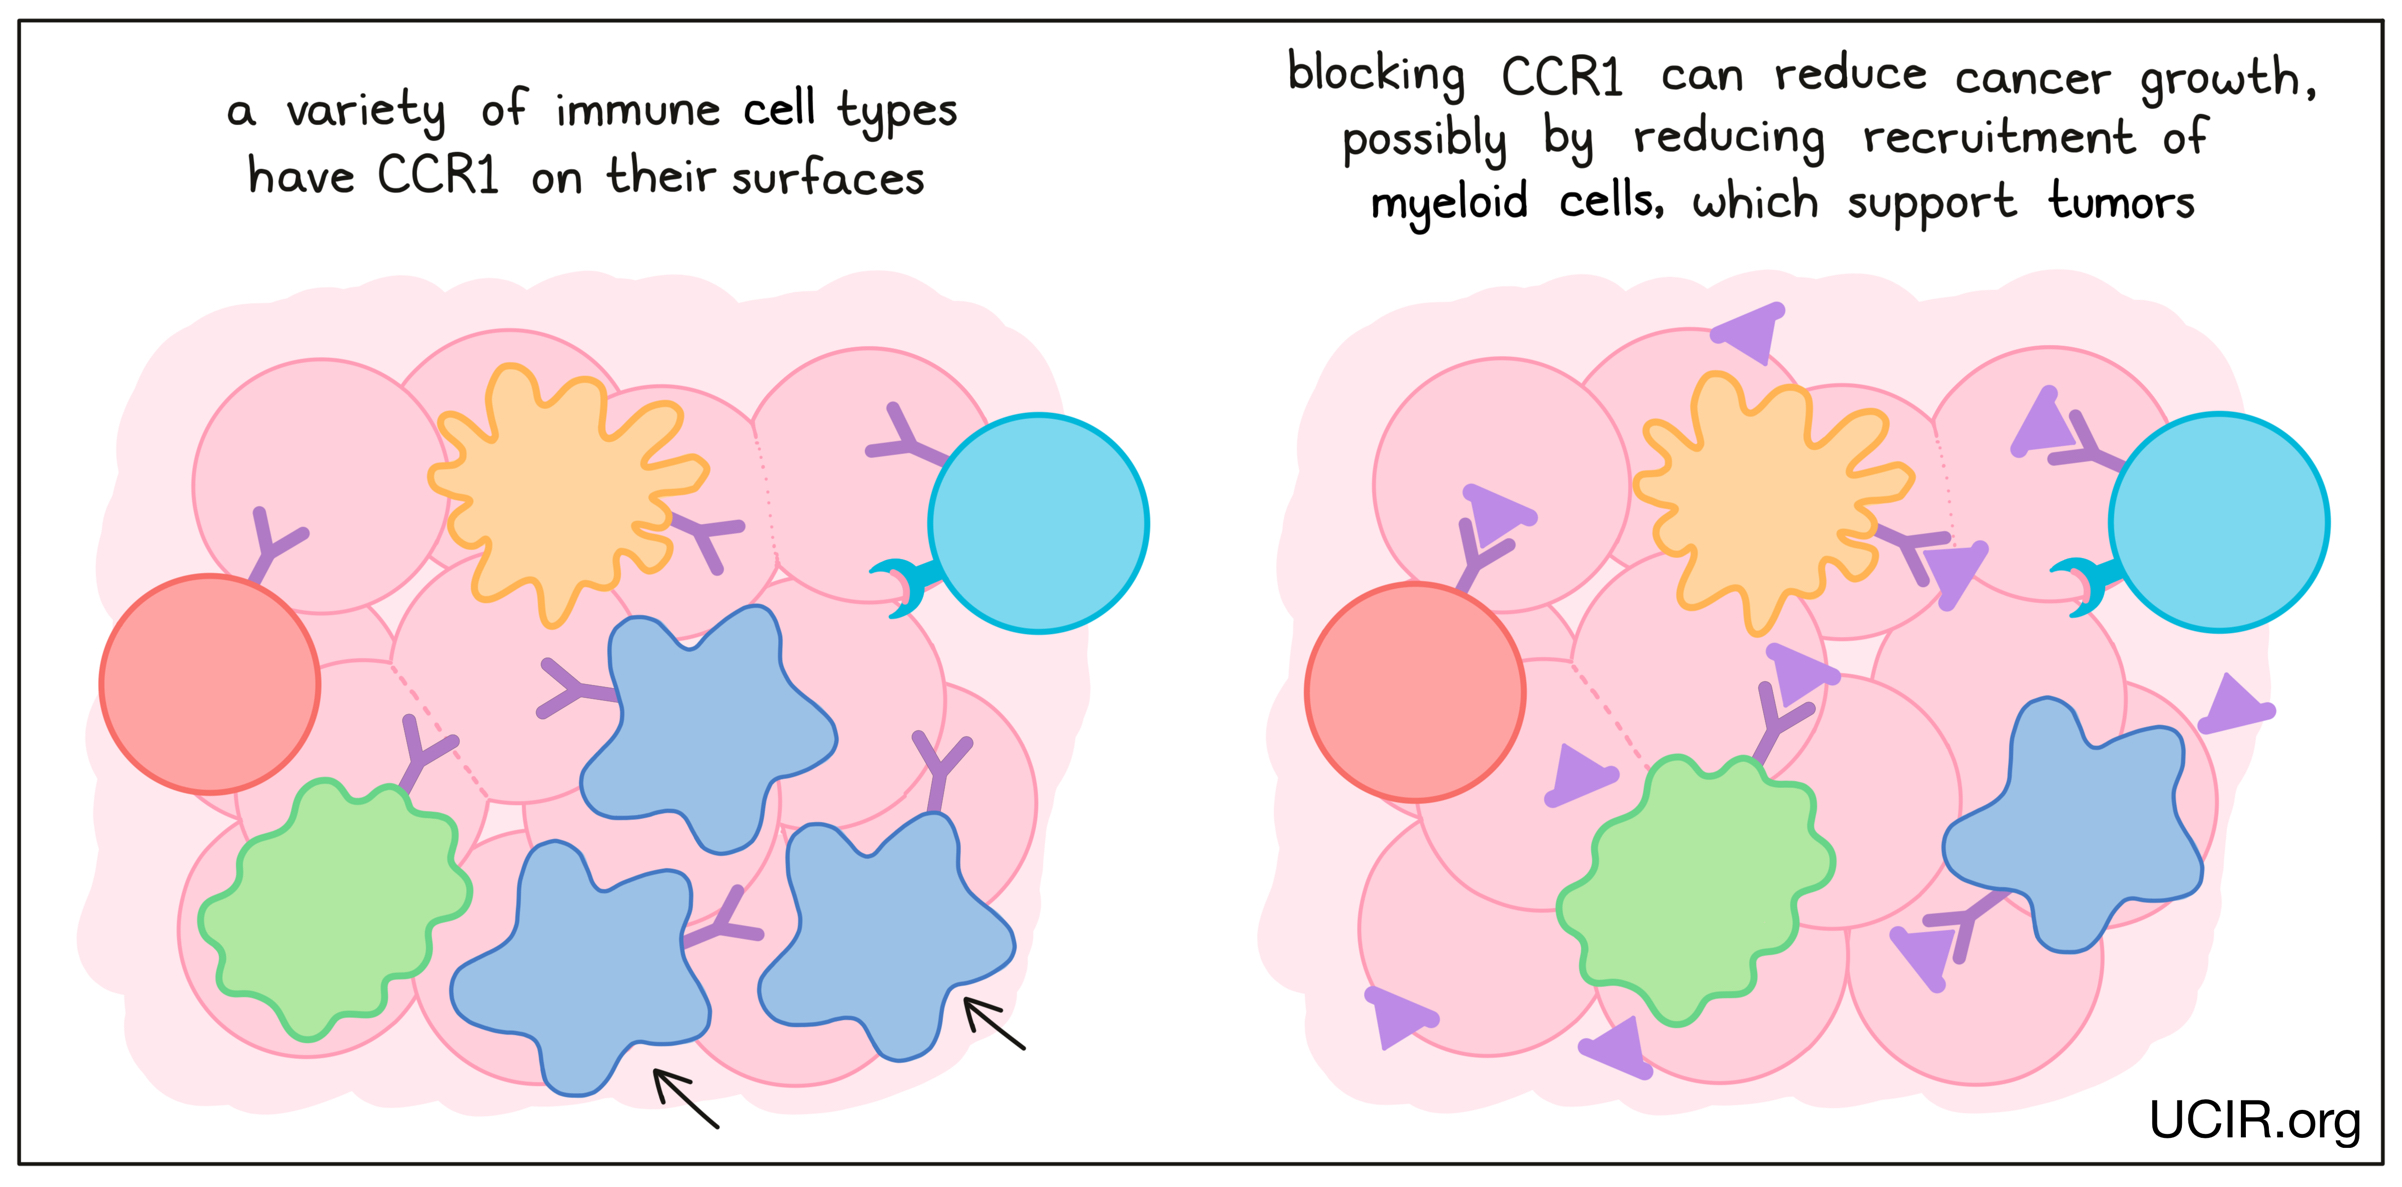 Illustration showing what blocking CCR1 does